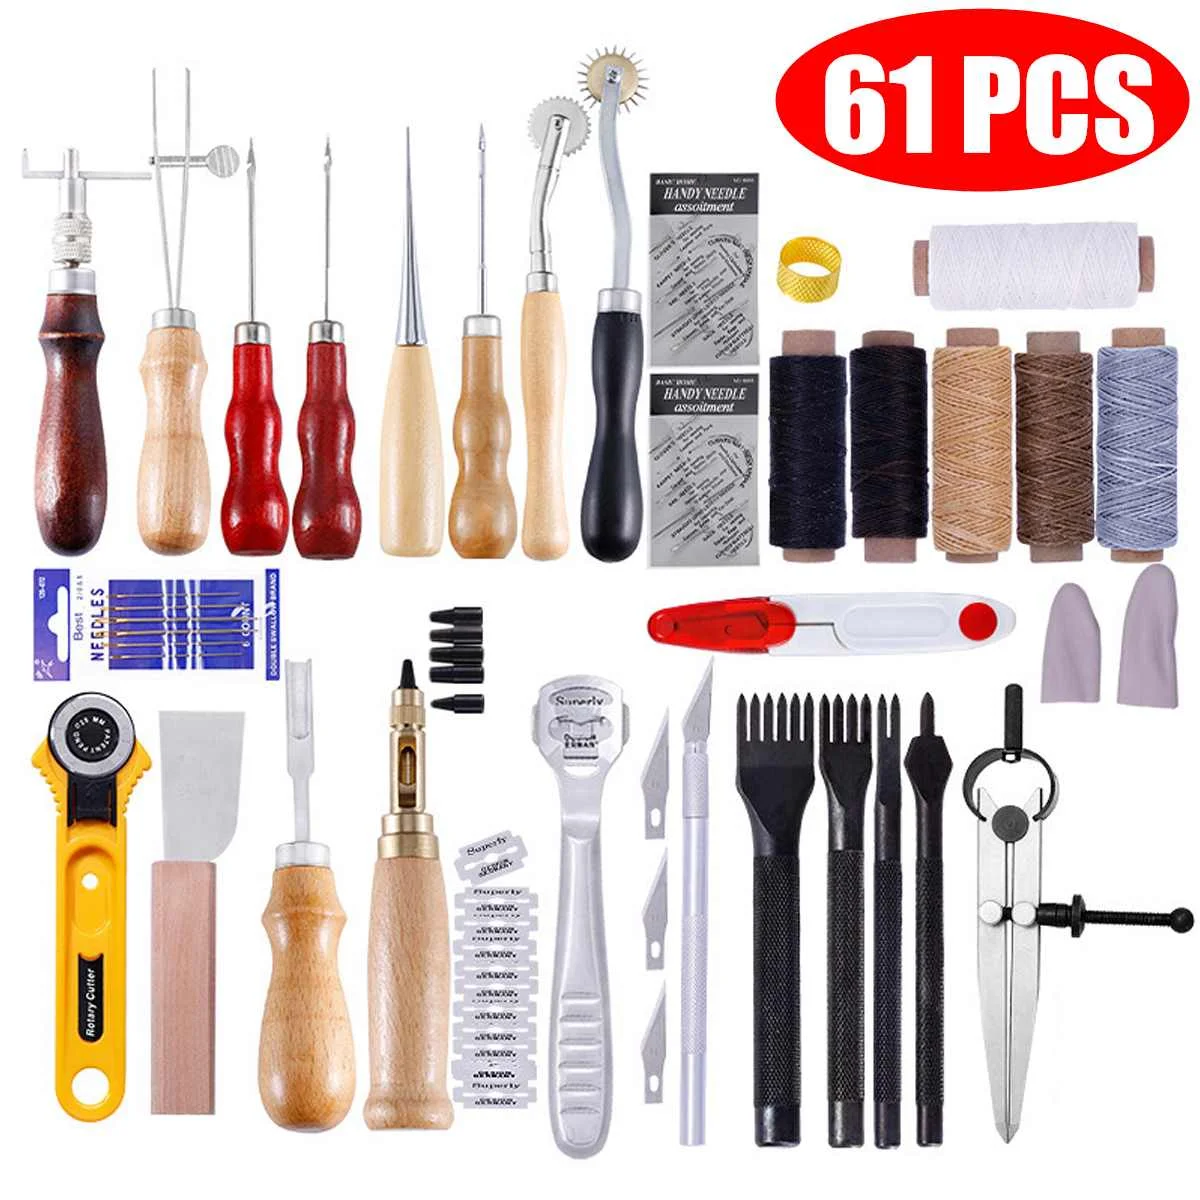 

Professional 61 Pcs/Set Leather Craft Tools Kit Home Hand Sewing Stitching Punch Carving Work Saddle Leathercraft Accessories